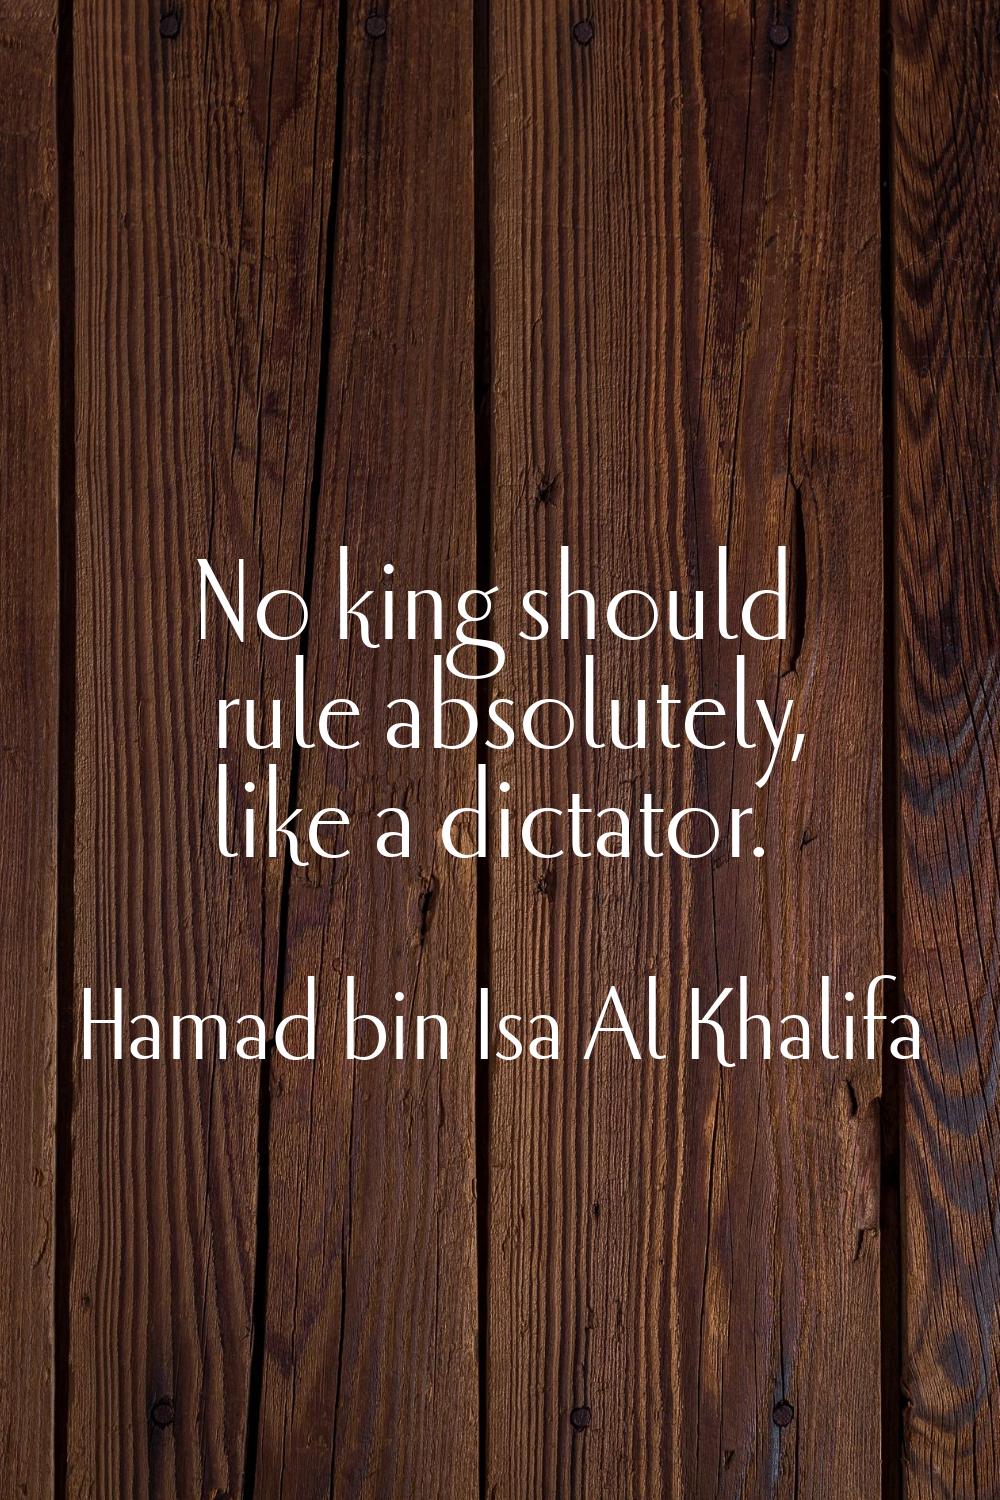 No king should rule absolutely, like a dictator.